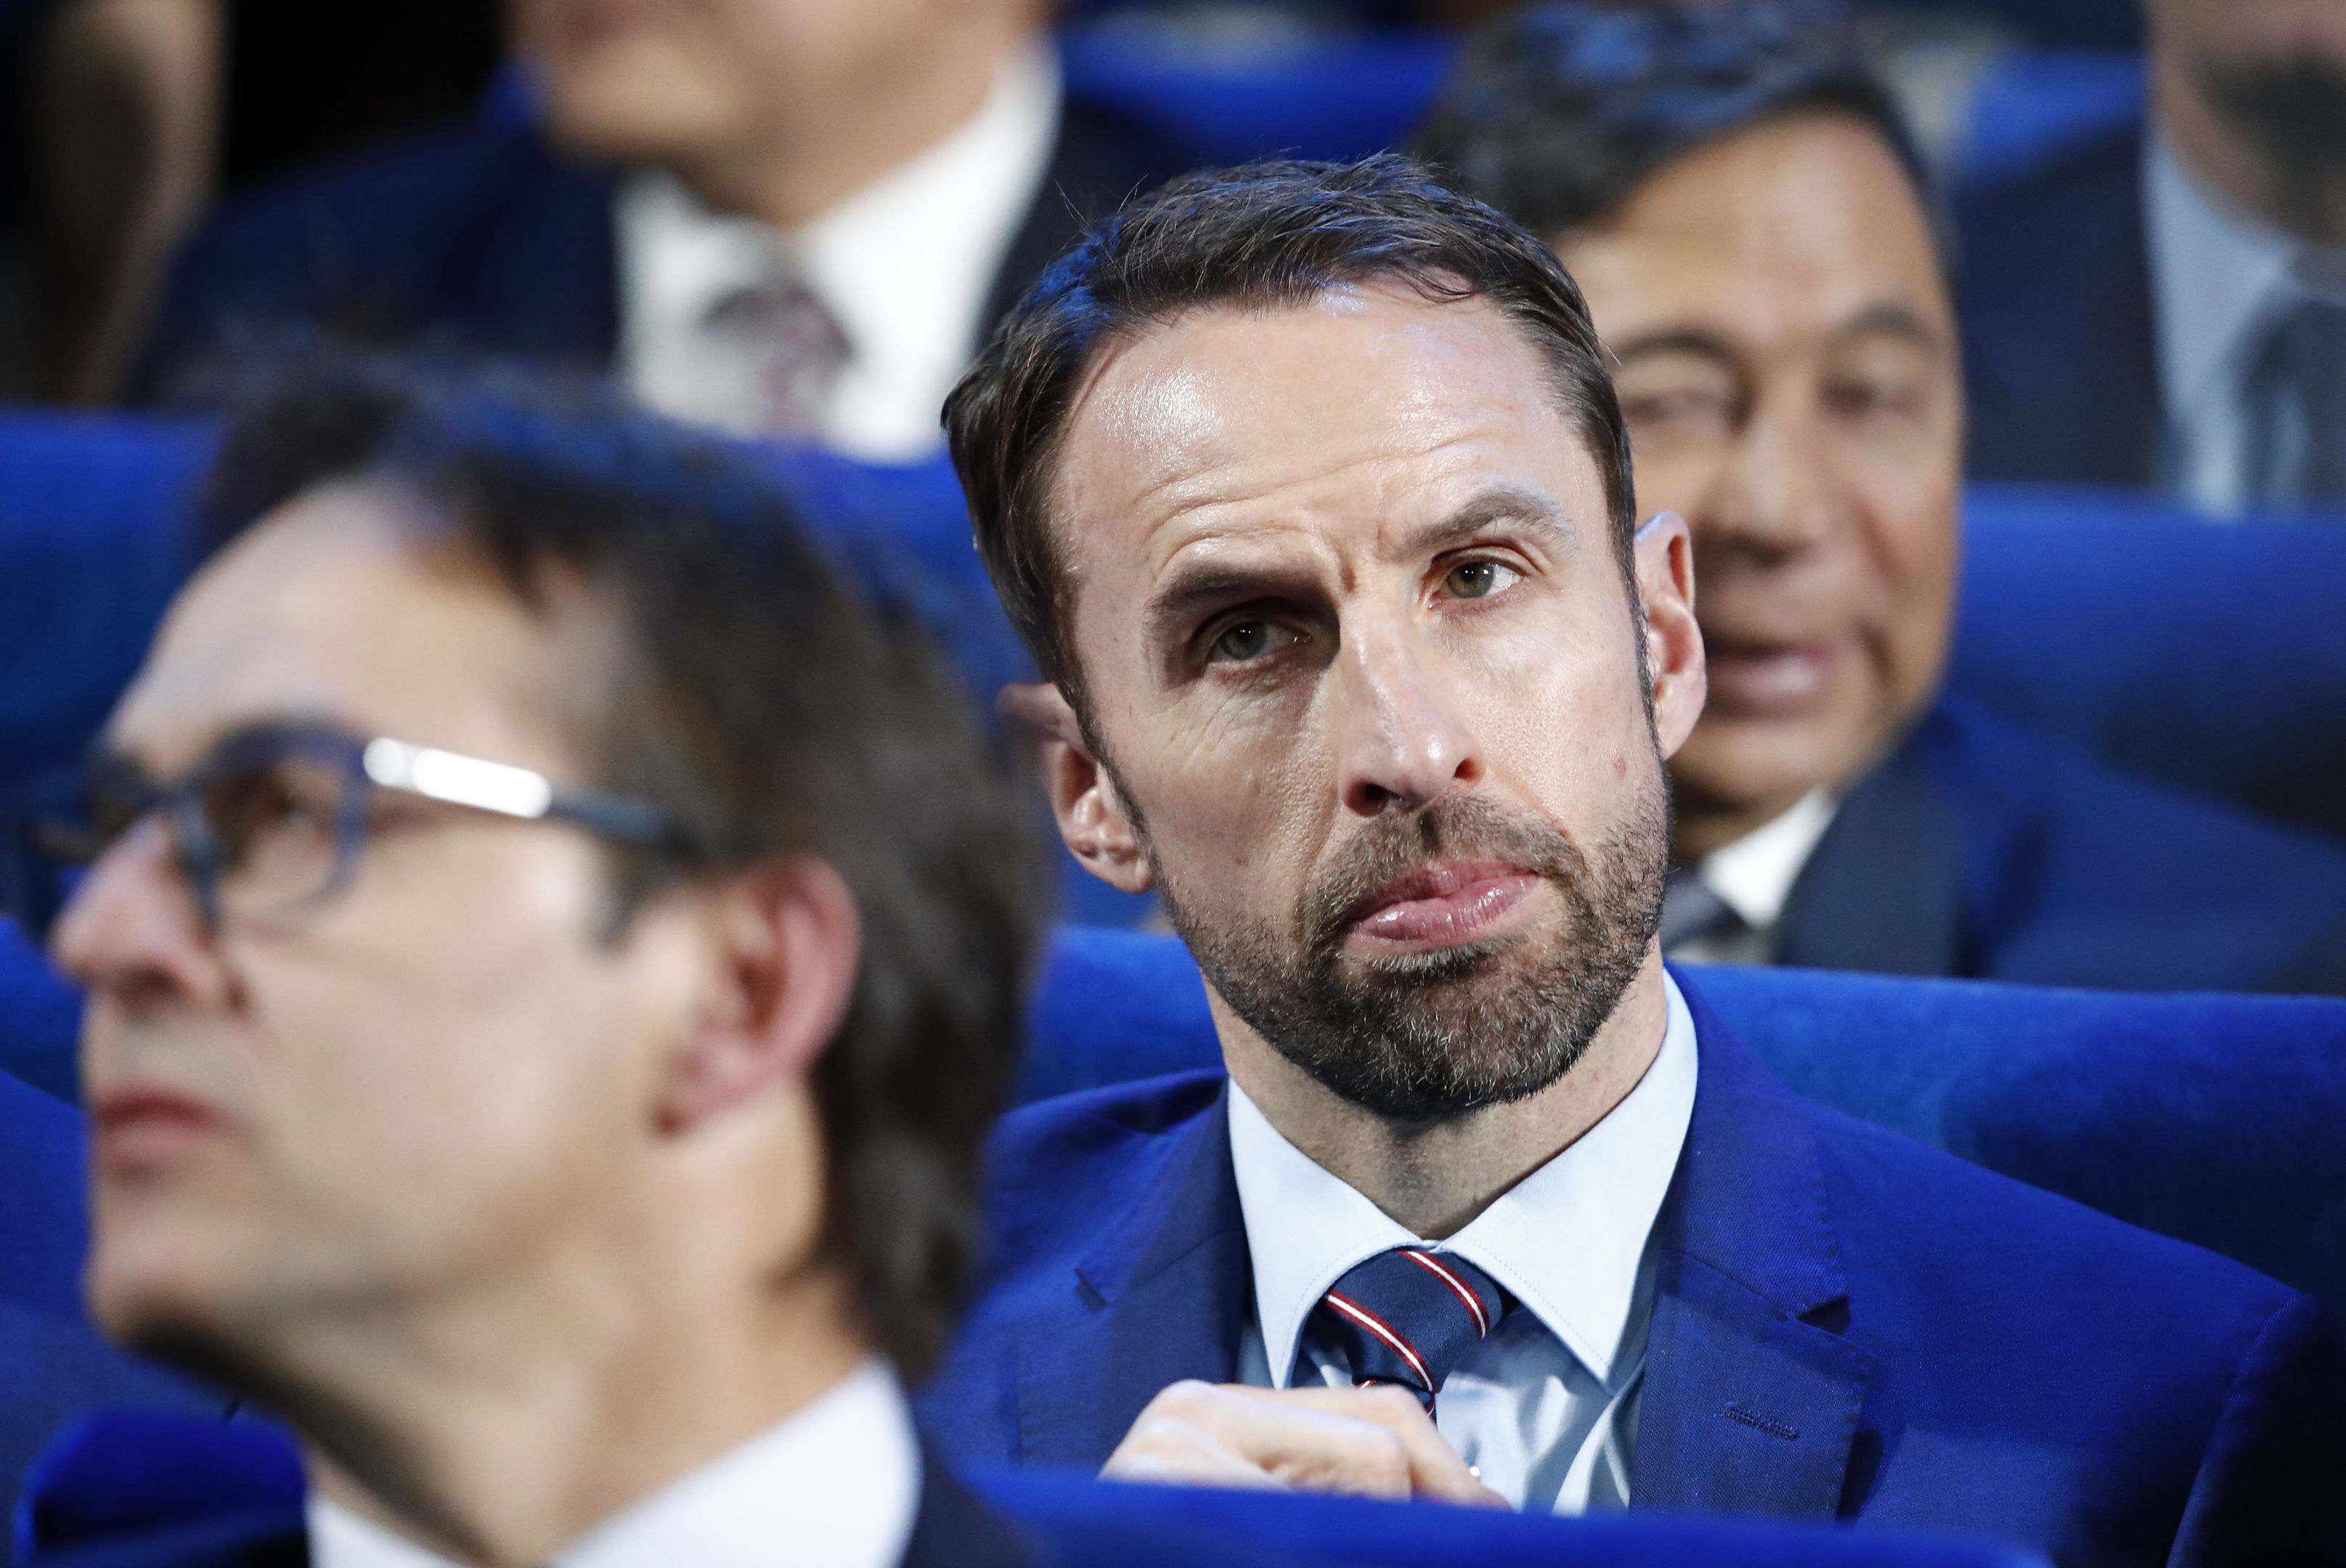 Gareth Southgate attends the 2018 World Cup draw (AP Photo/Pavel Golovkin)